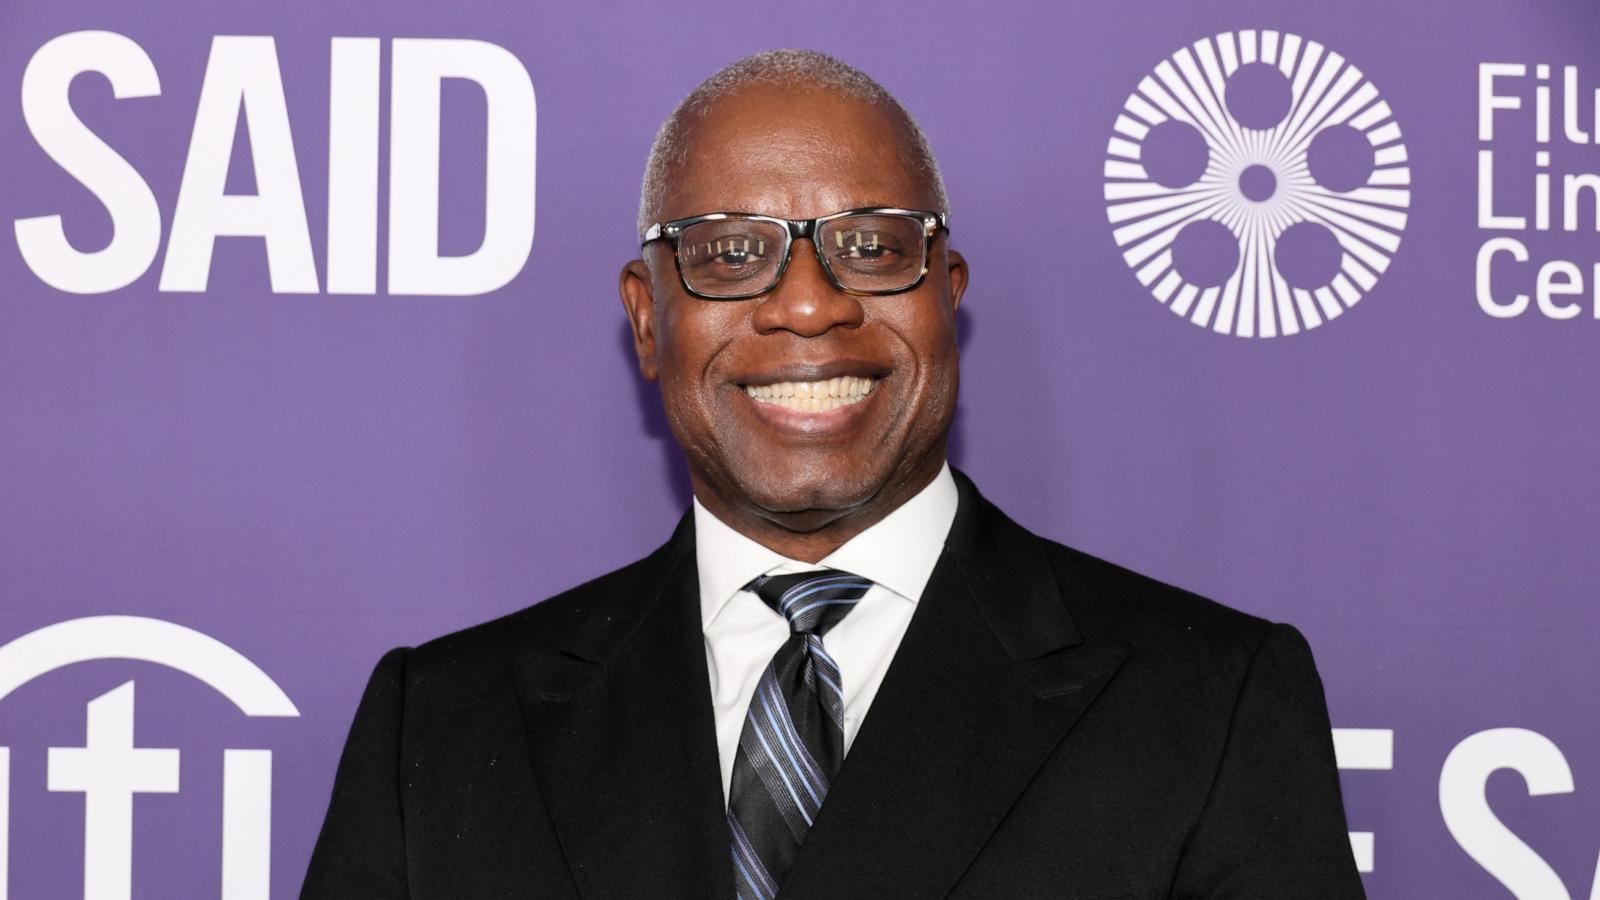 PHOTO: Andre Braugher attends the red carpet event for "She Said" during the 60th New York Film Festival at Alice Tully Hall, Lincoln Center on October 13, 2022 in New York City.